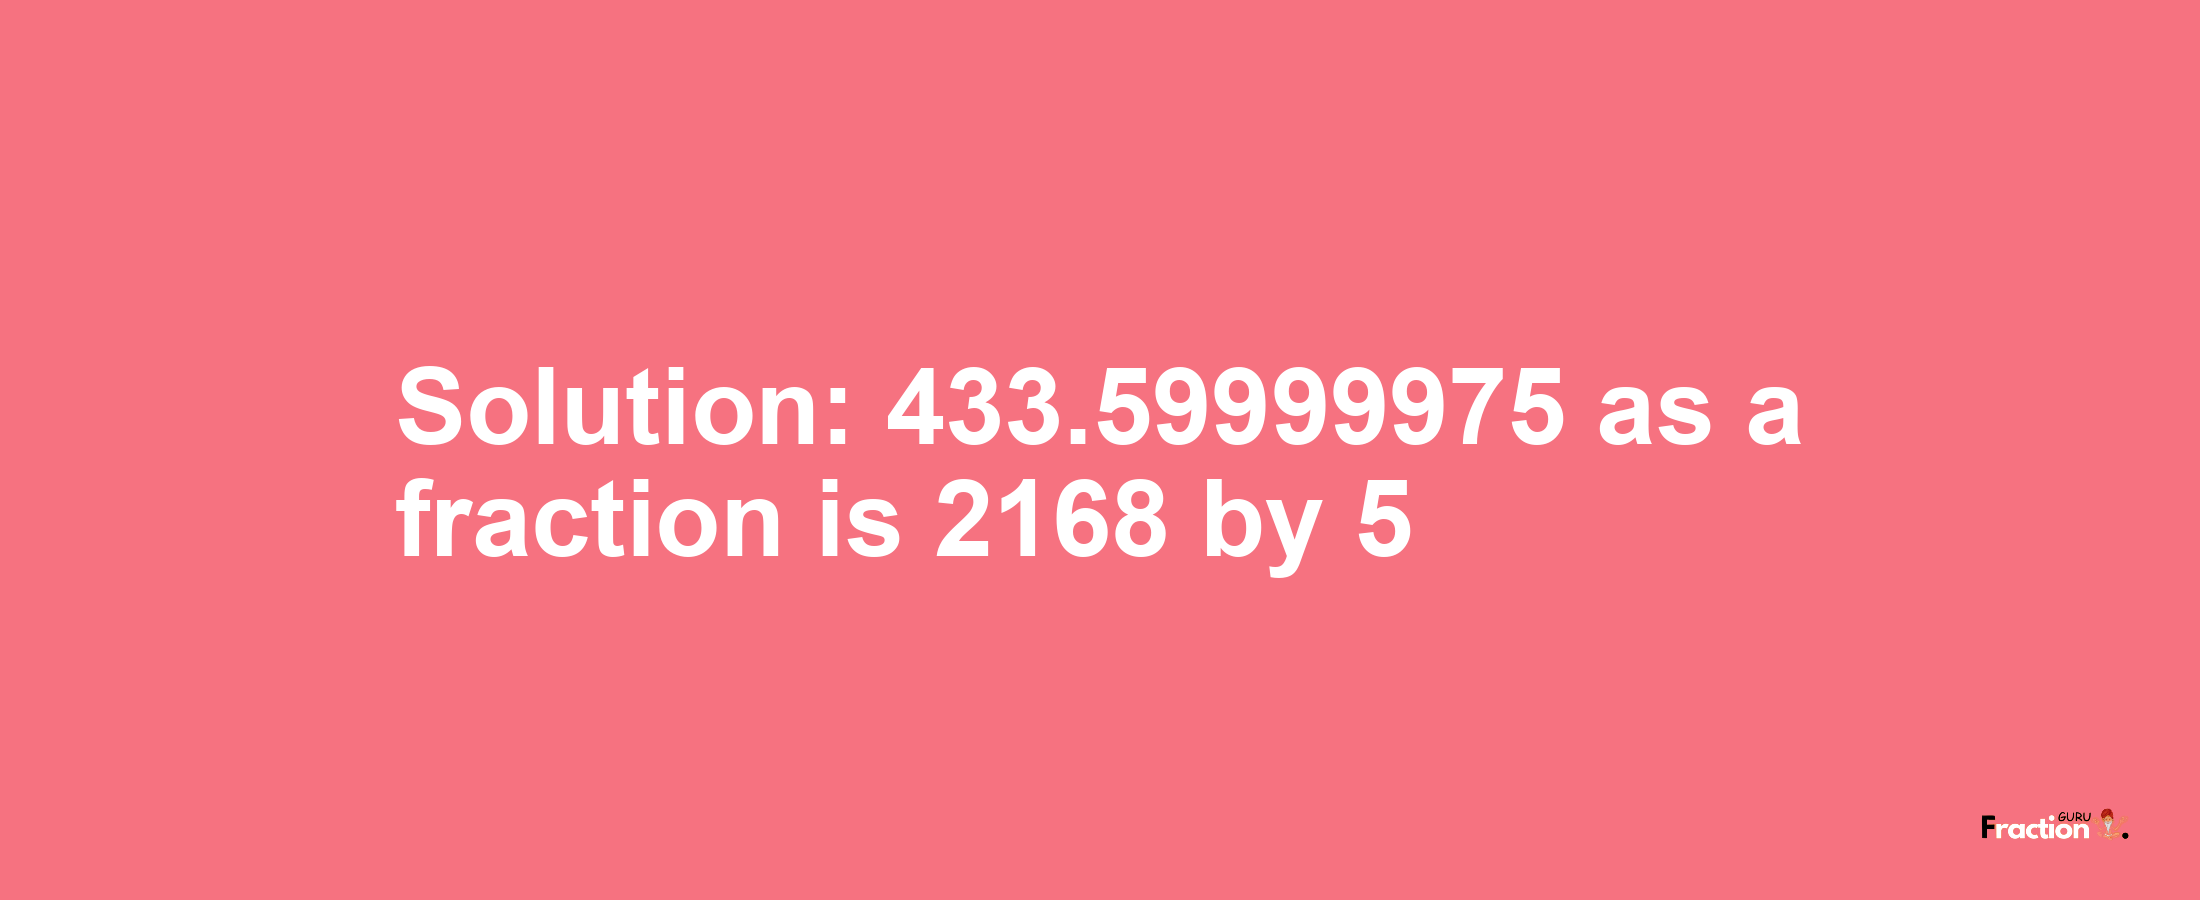 Solution:433.59999975 as a fraction is 2168/5